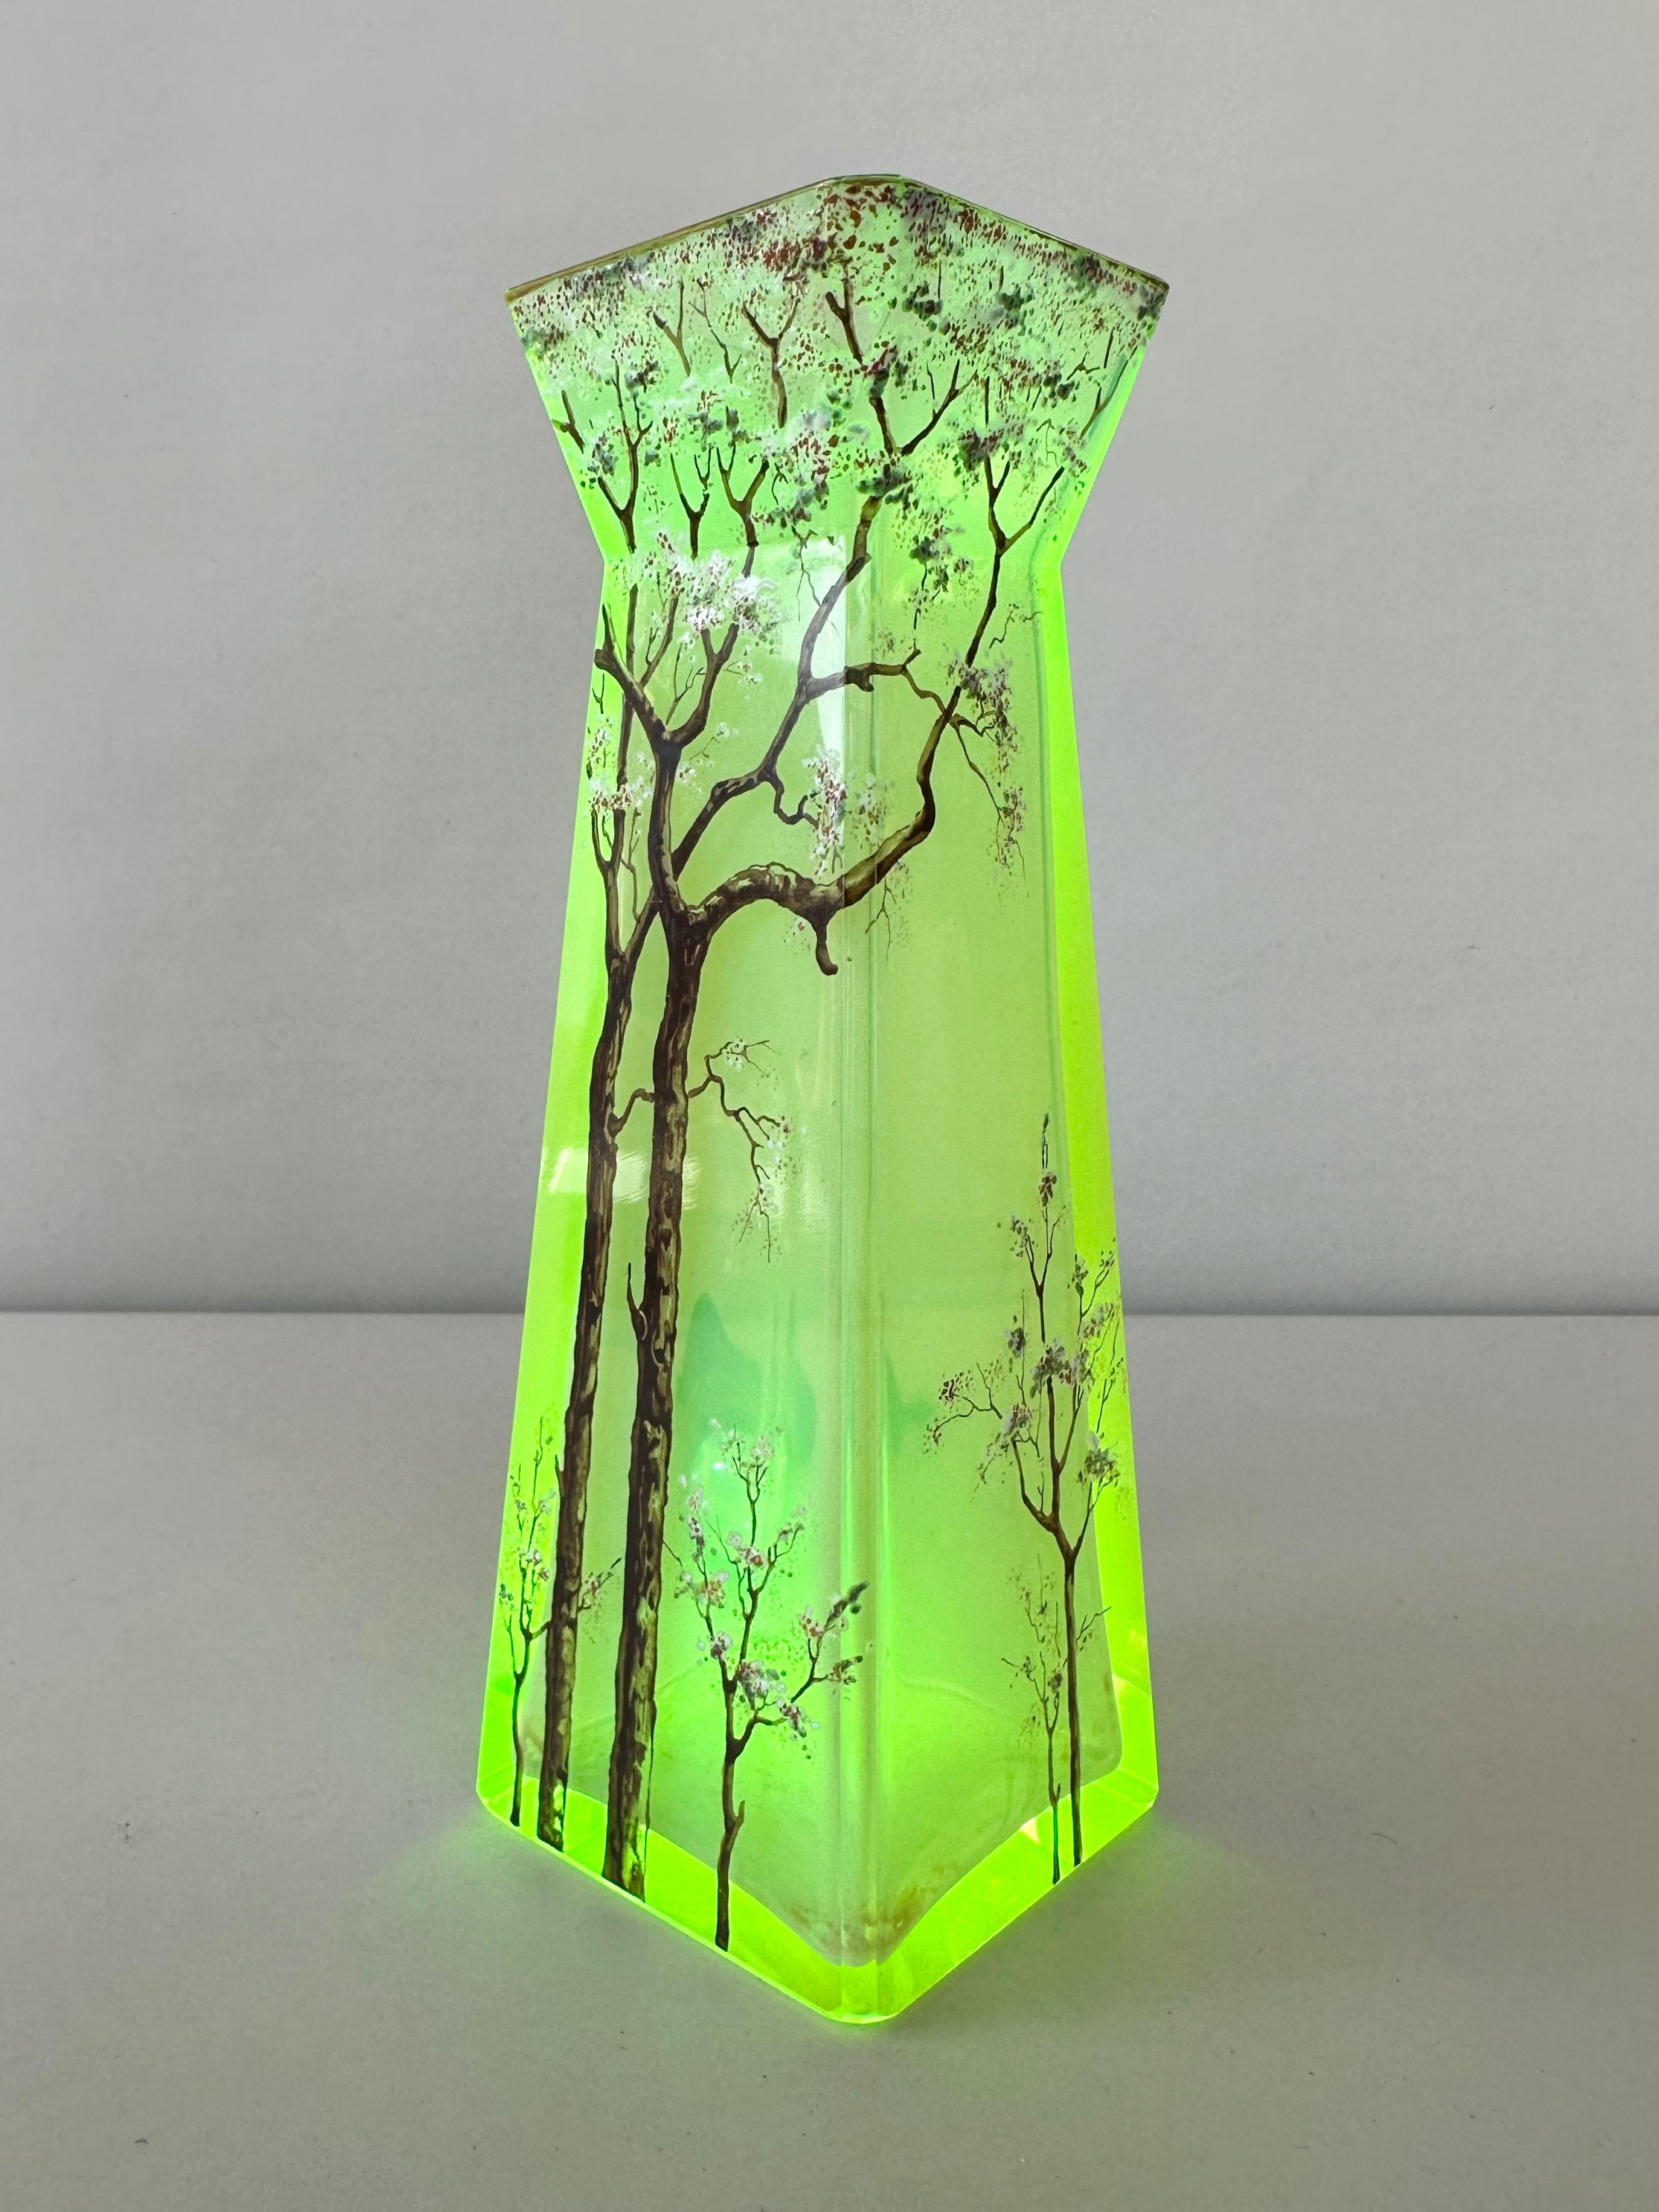 A very uncommon and striking circa 1900 hand-painted cherry tree motif vaseline glass vase done in the style of Daum.

Square, gathered form in vaseline glass—also known as uranium glass—that has a lovely faintly milky citron color in natural